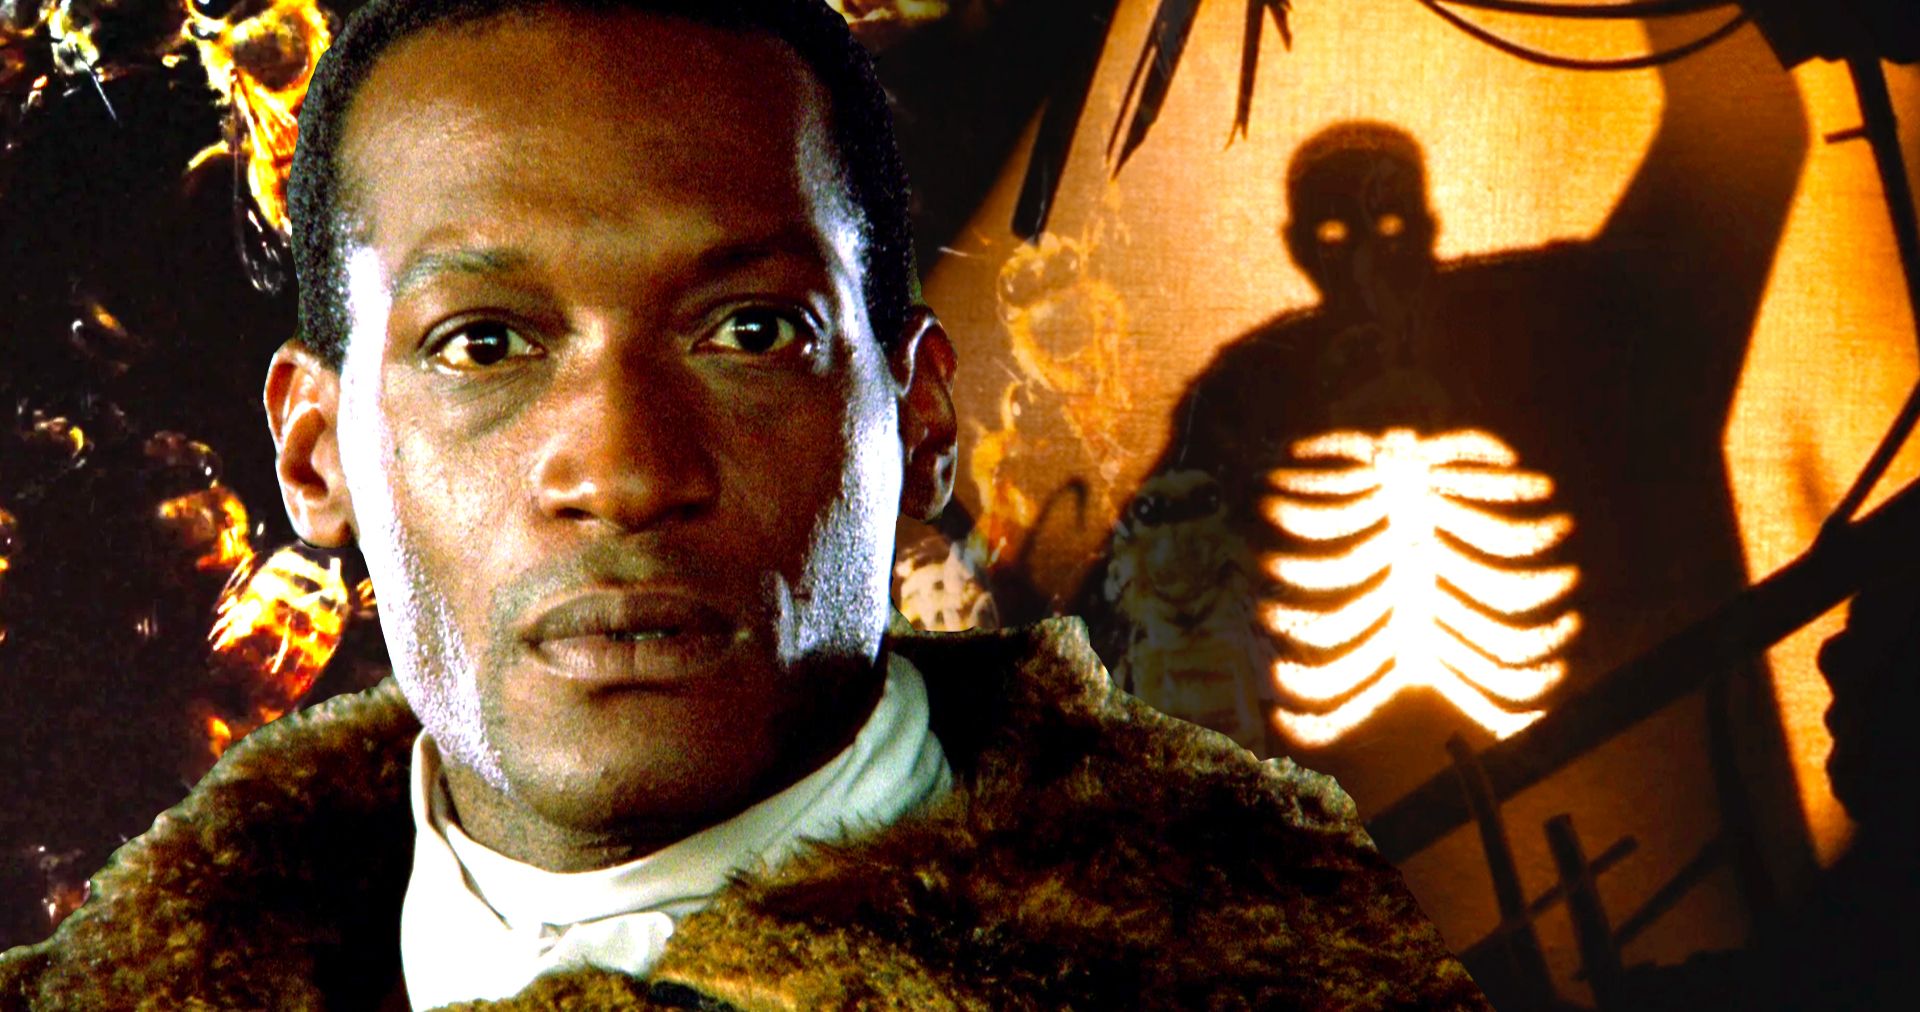 How the New Candyman Builds on Crucial Connections to the Original Film Characters